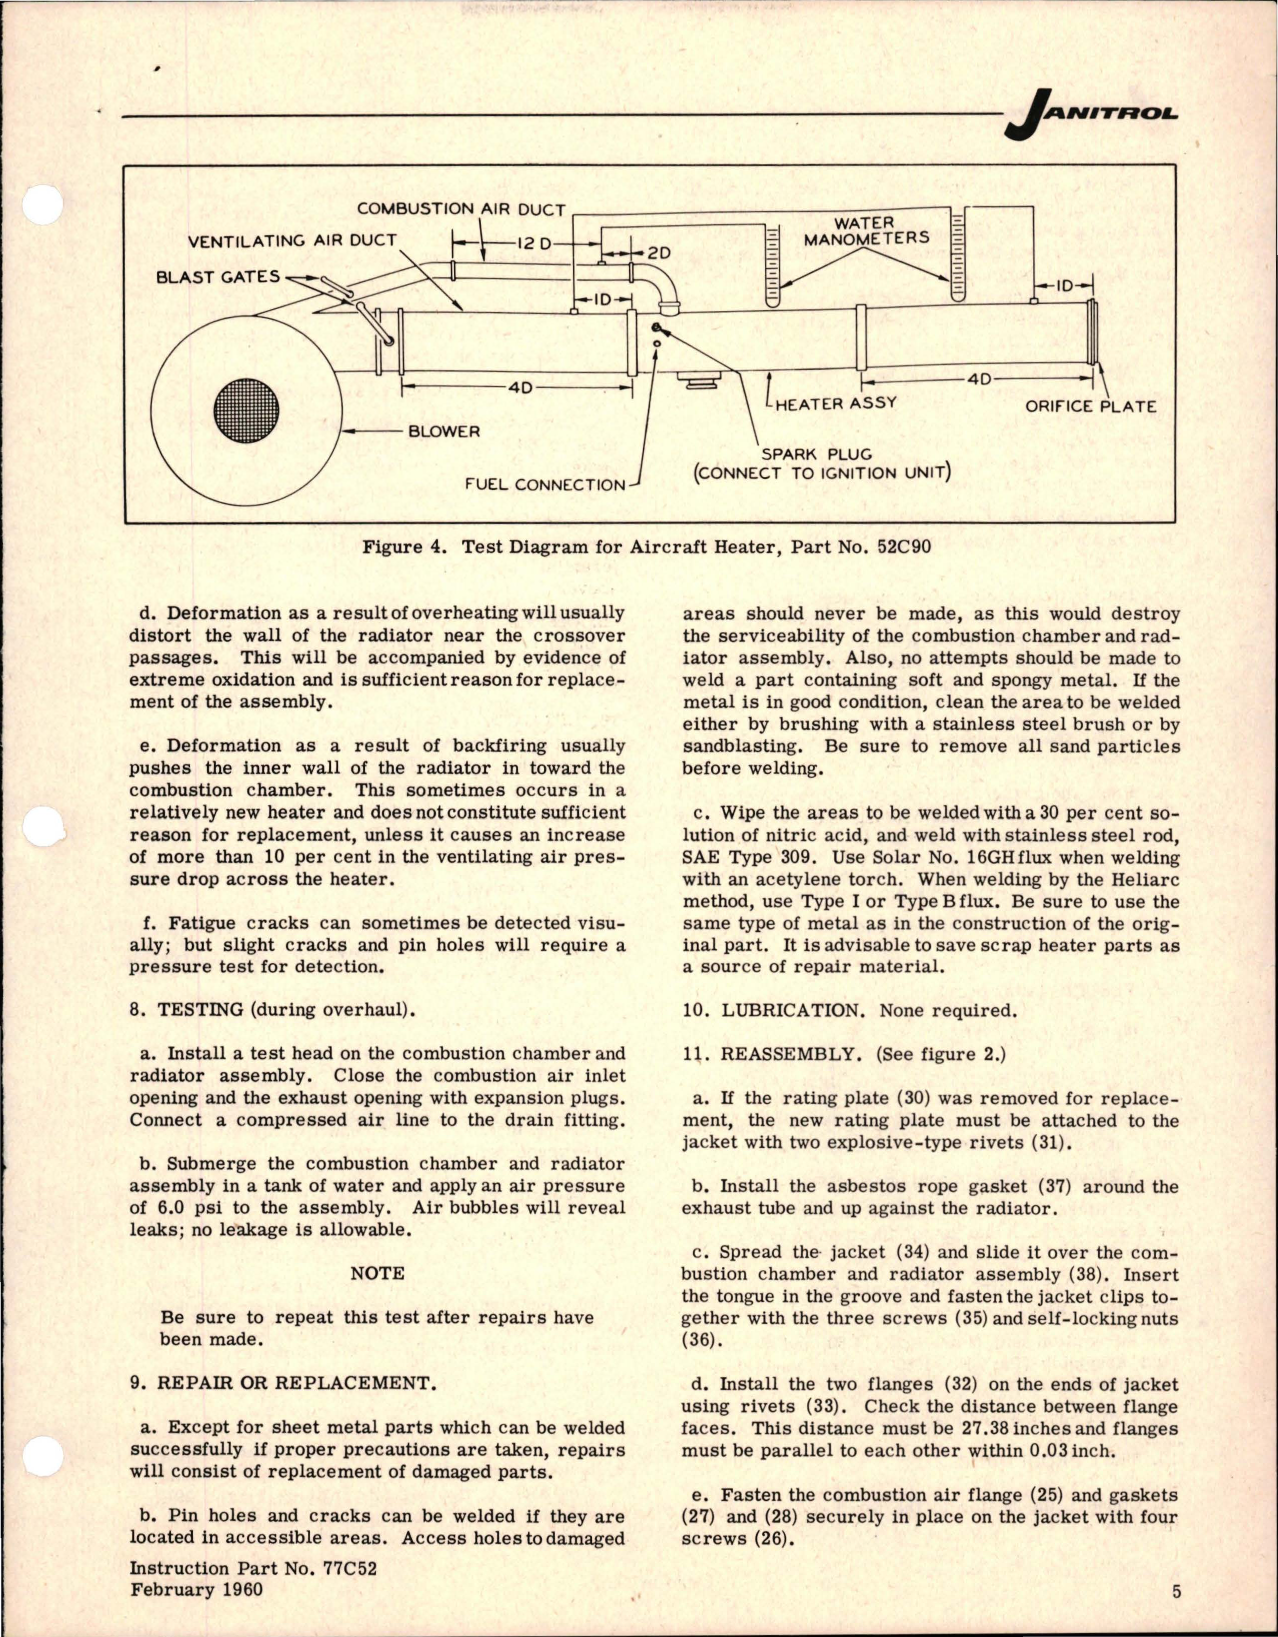 Sample page 5 from AirCorps Library document: Maintenance Instructions for Aircraft Heater - Part 52C90 - Type S-100